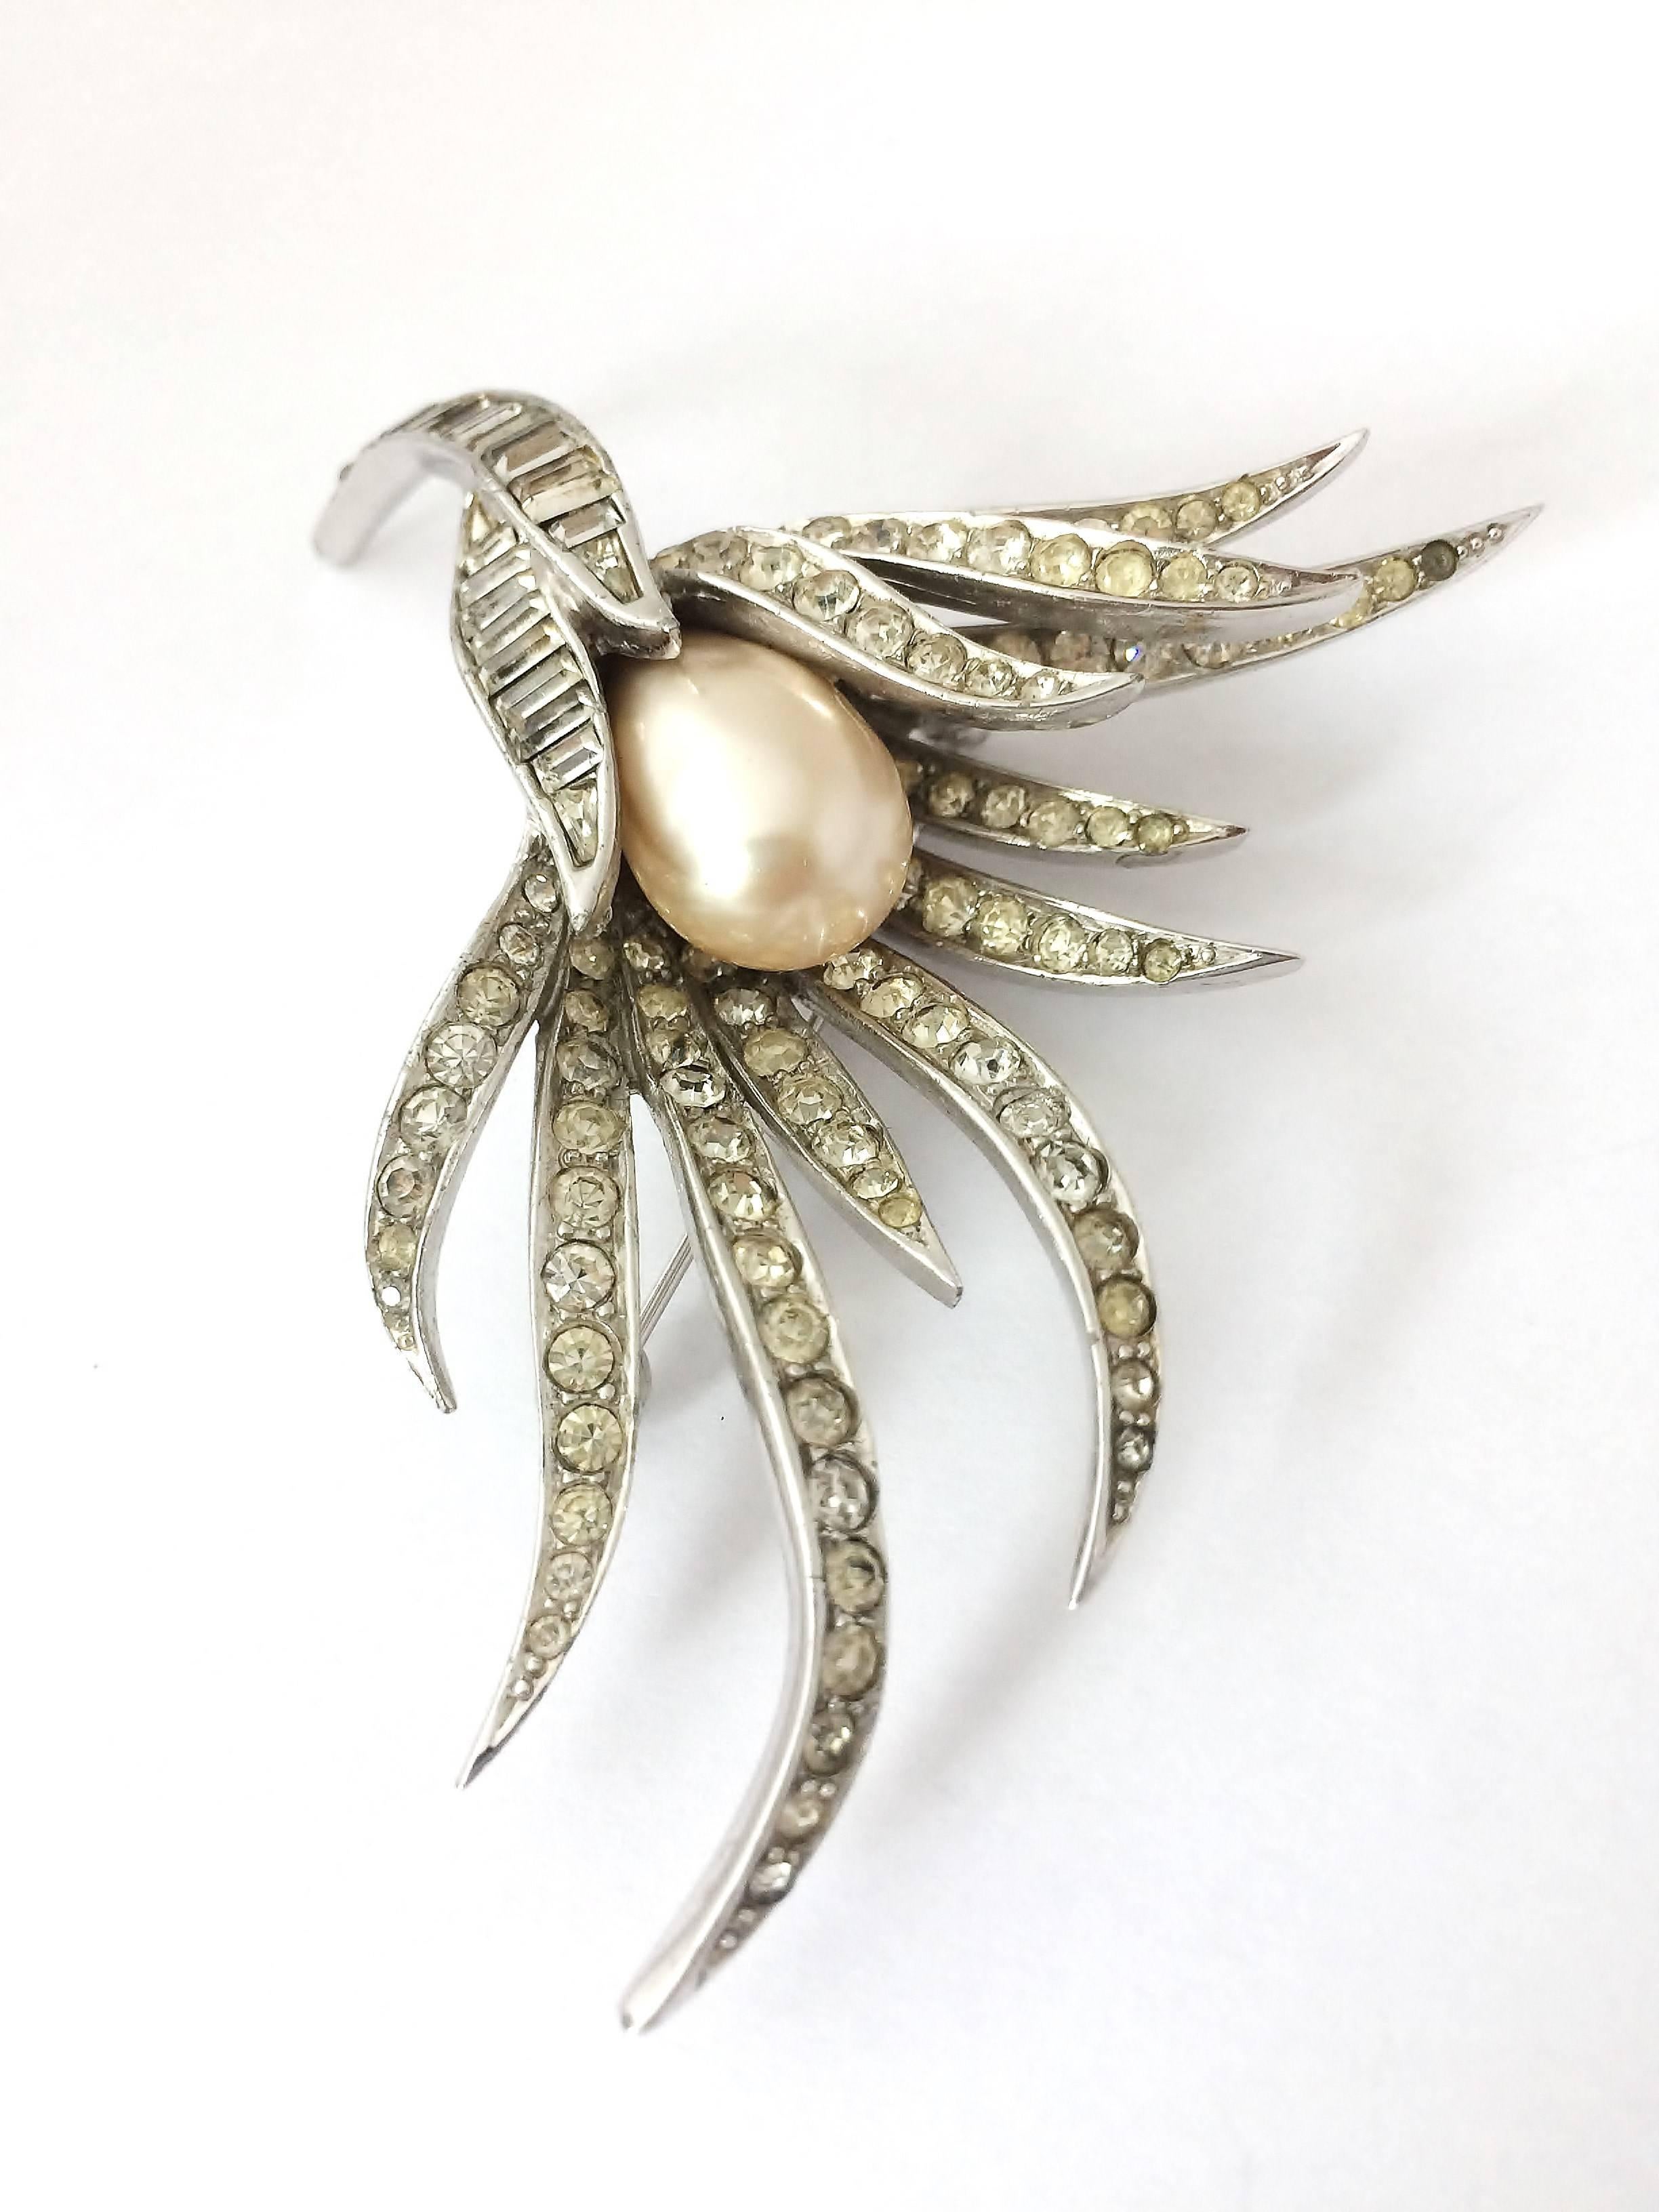 An exquisite brooch both in style and appearance from Marcel Boucher. White paste 'leaves' cradle a large baroque pearl, in a cascading spray brooch, redolent of Van Cleef and Arpels, and other jewellers of the period. As always, with Boucher, the